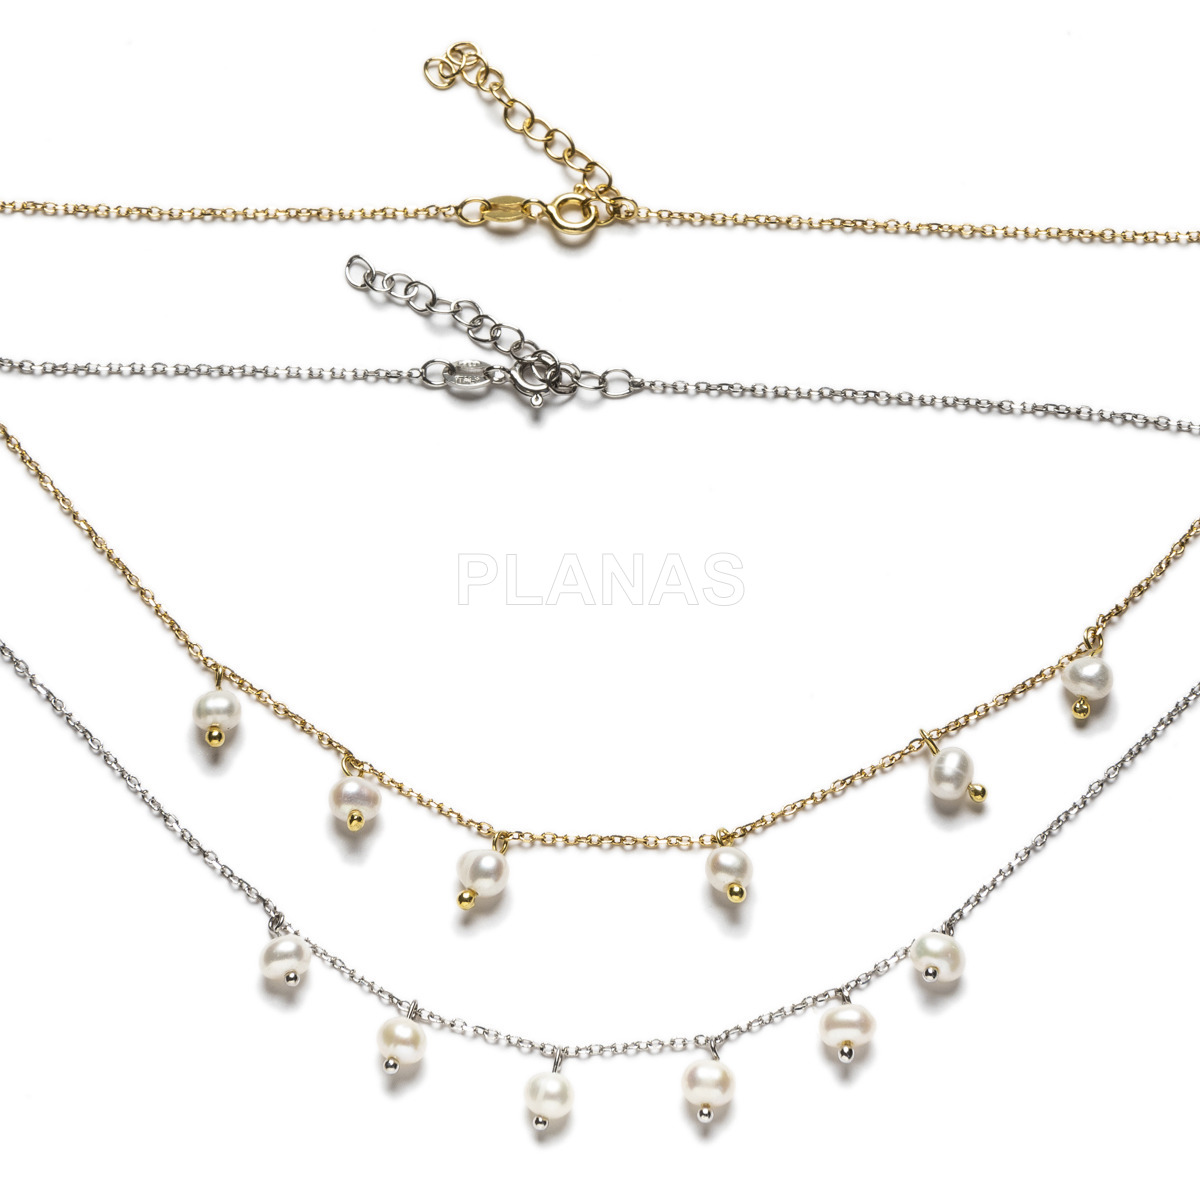 Rhodium plated sterling silver necklace with cultured pearls.